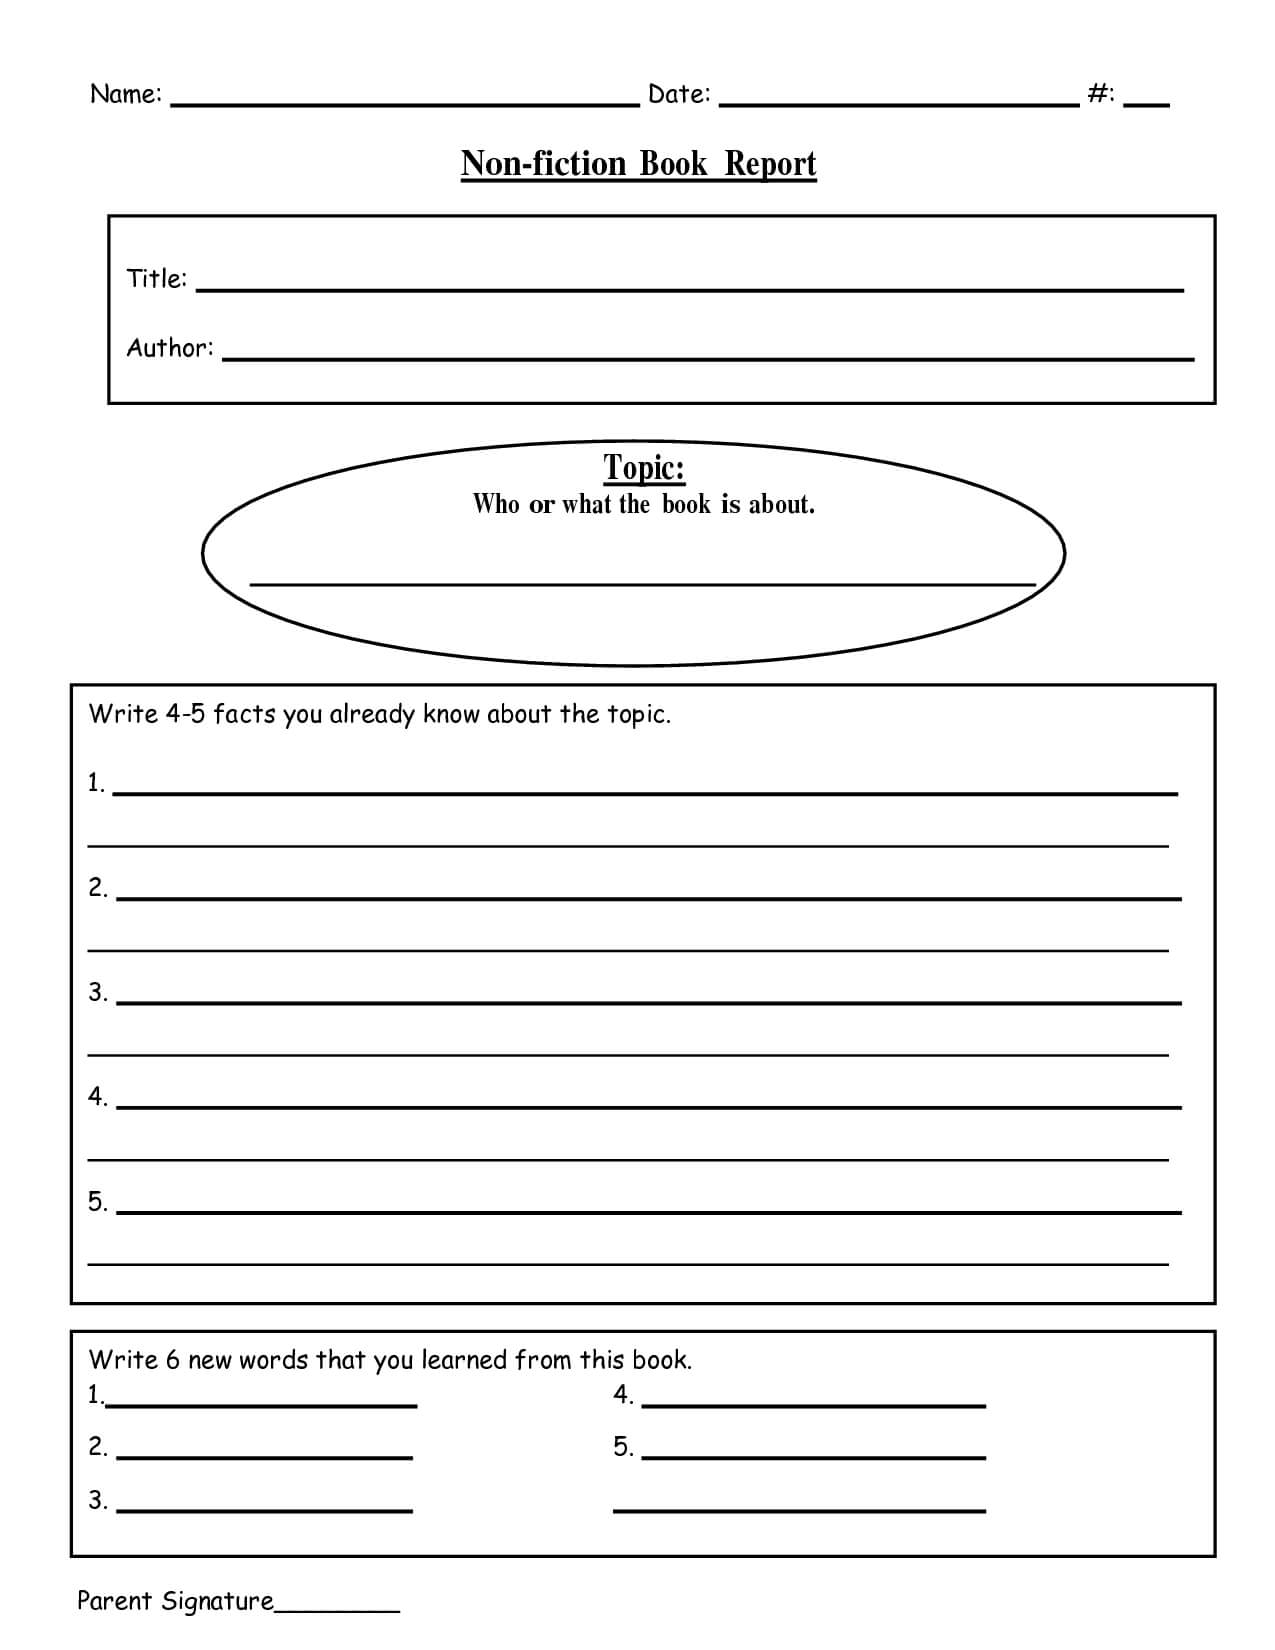 28 Images Of 5Th Grade Non Fiction Book Report Template With 5Th Grade Book Report Template